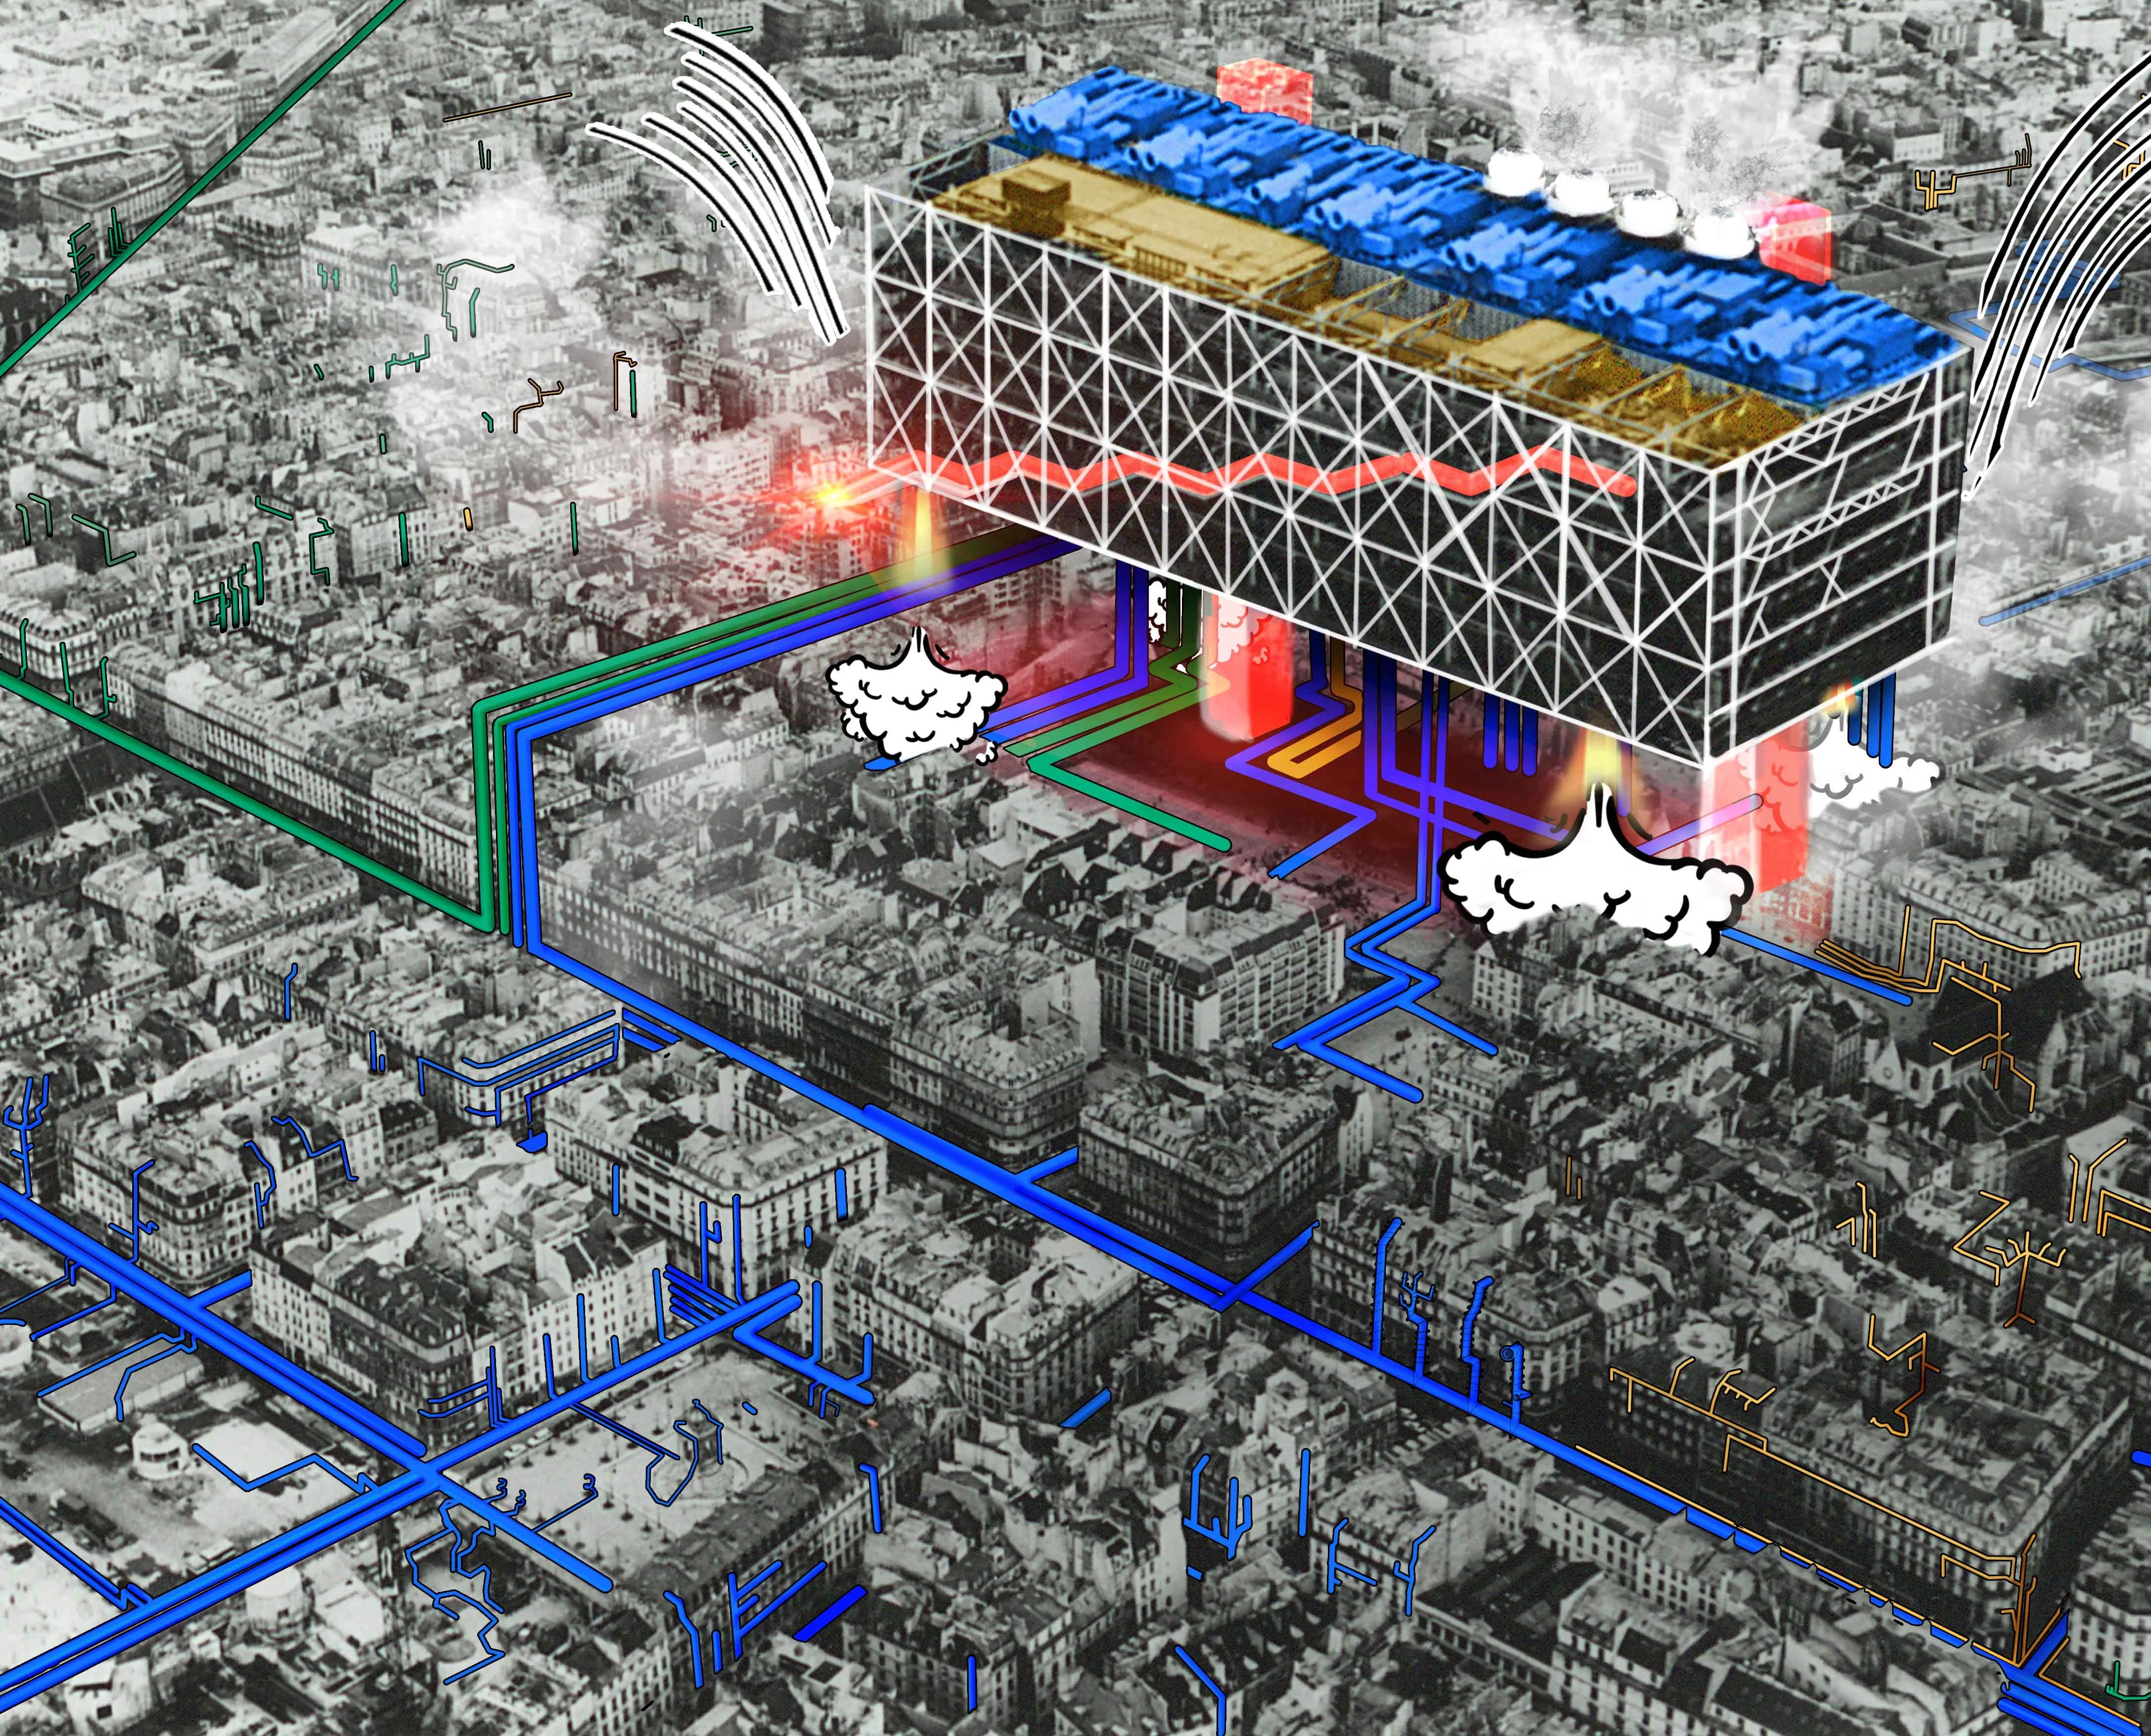 moo3 architectural competition for designing a work and living space in times of pandemic